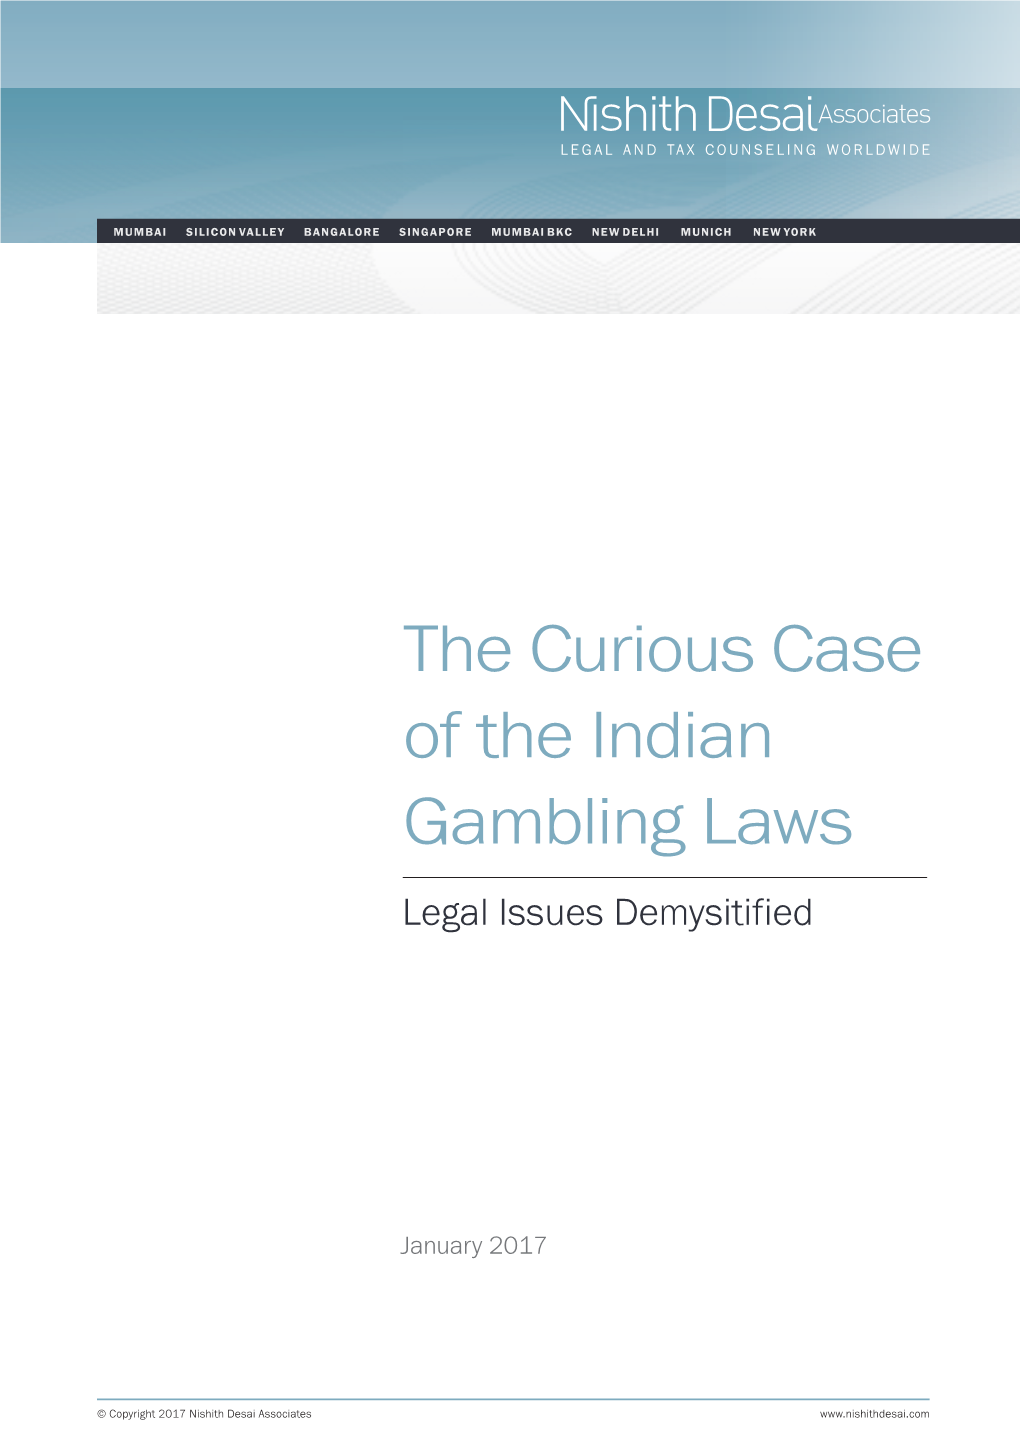 The Curious Case of the Indian Gambling Laws Legal Issues Demysitified Copyright 2017, Nishith Desai Associates